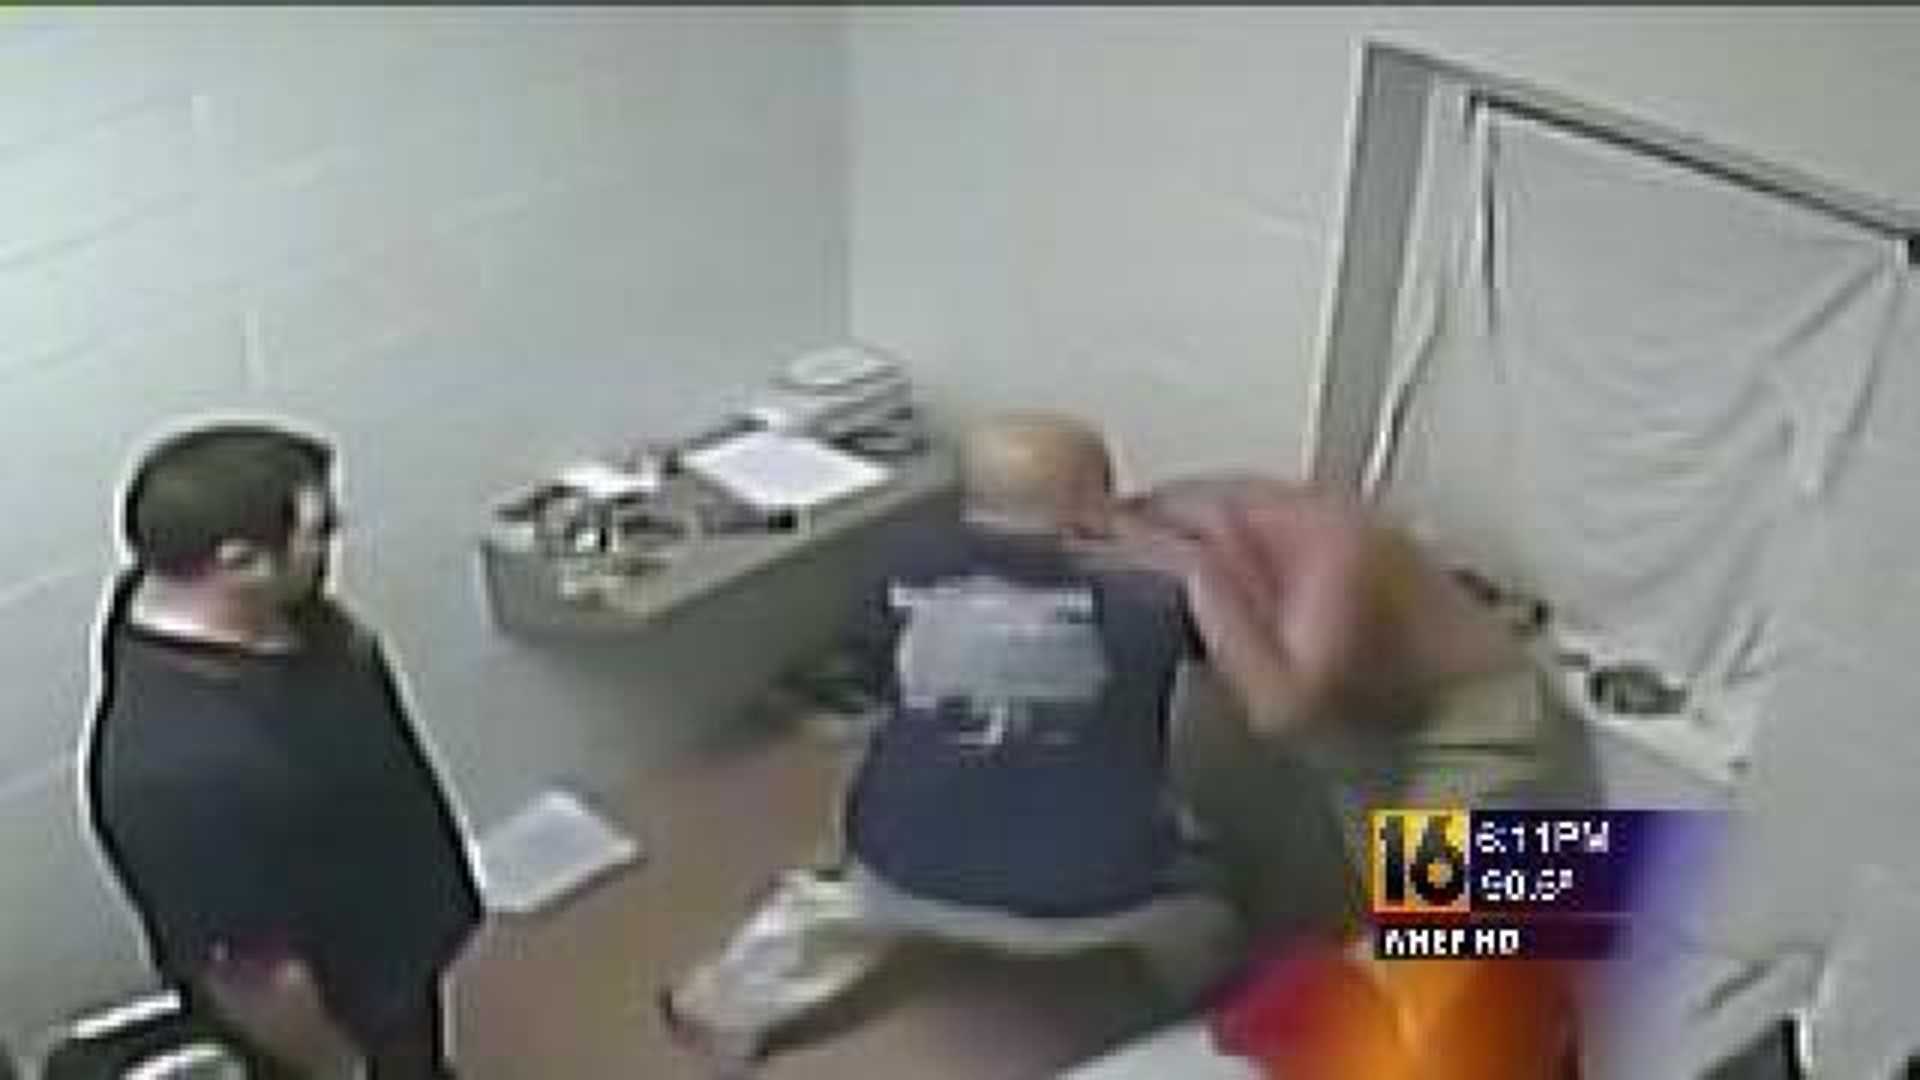 Jail Surveillance Video: Was Teen Inmate Attacked?